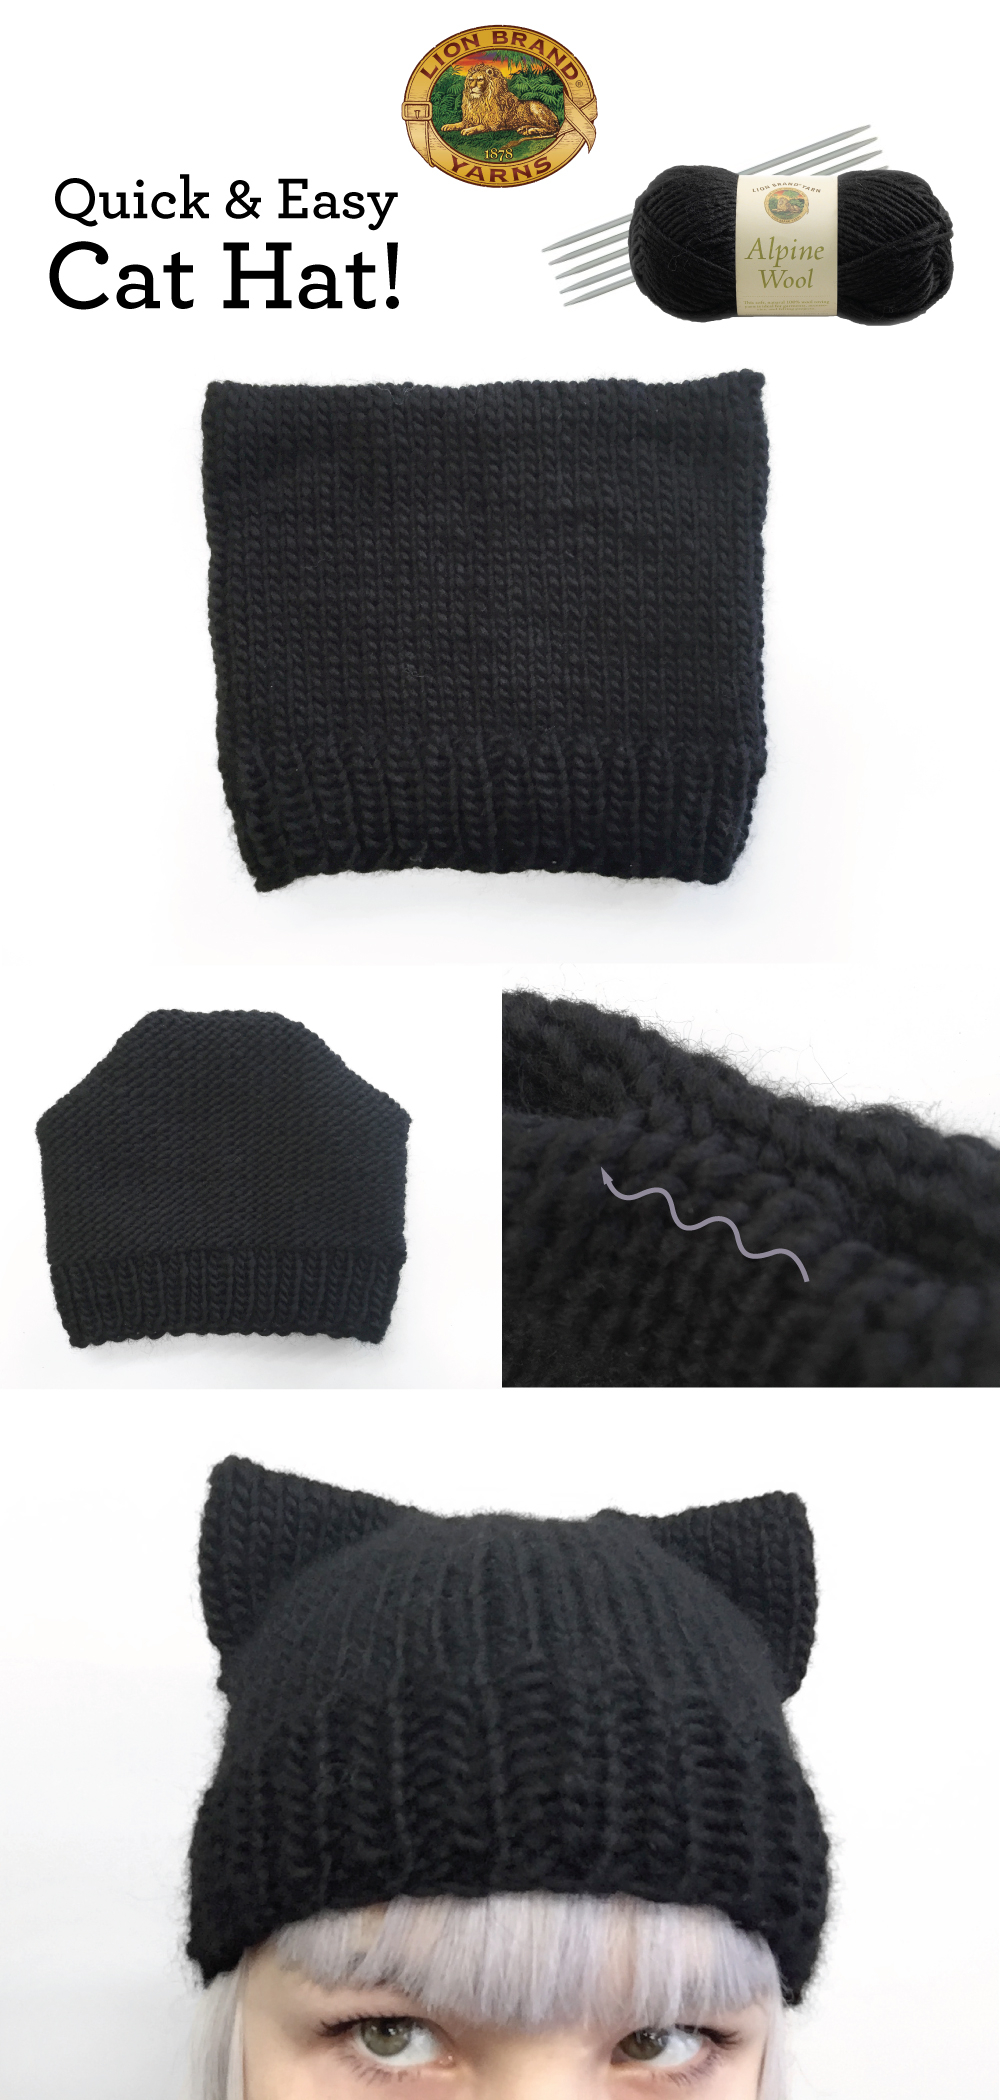 Easy Knit Hat Pattern For Beginners Knit A Quick Easy Cat Hat Lion Brand Notebook